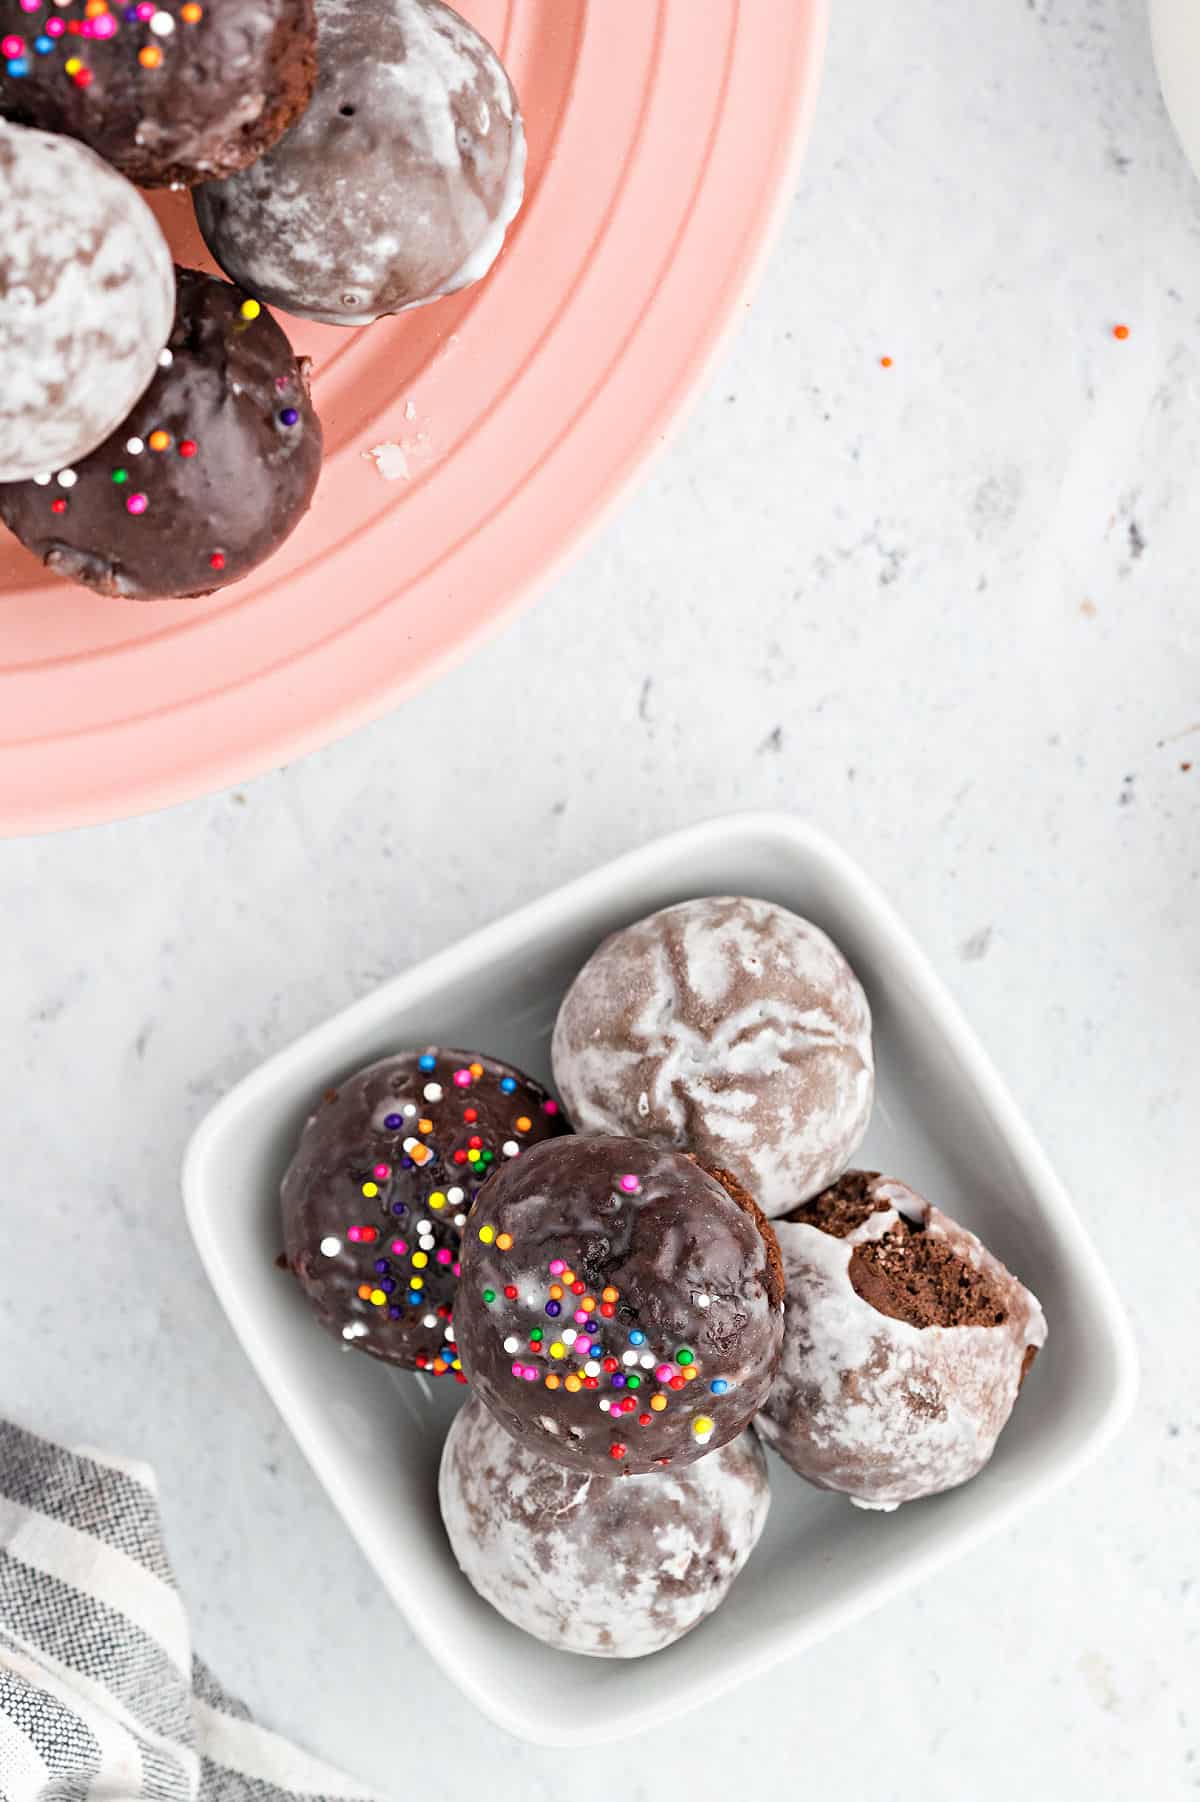 Glazed chocolate donut holes, some with sprinkles, in a white bowl.